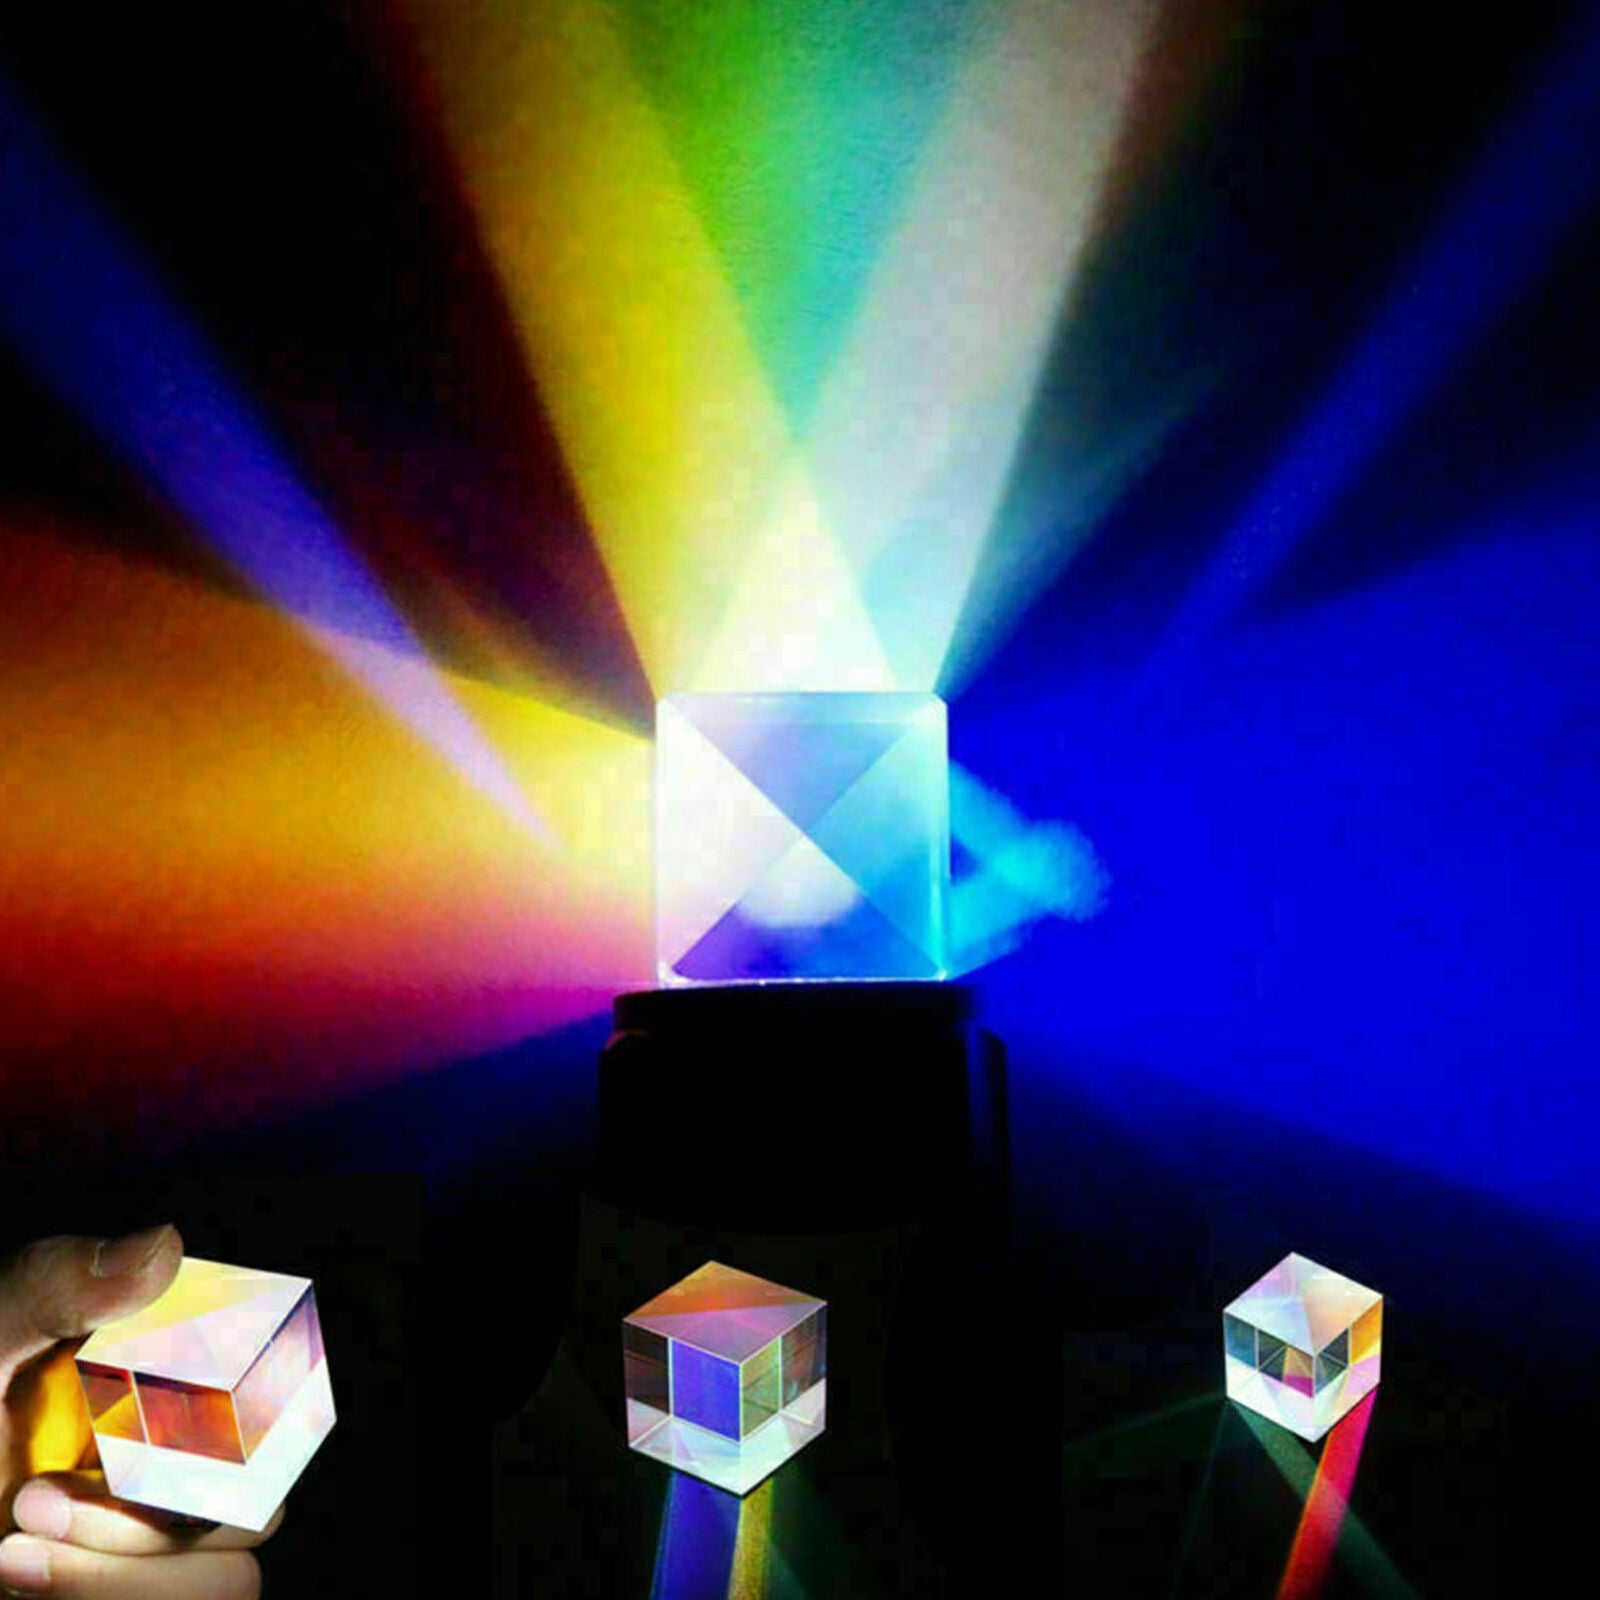 Optical Glass X-cube Dichroic Cube Prism RGB Combiner Splitter Gifts Soft 2020